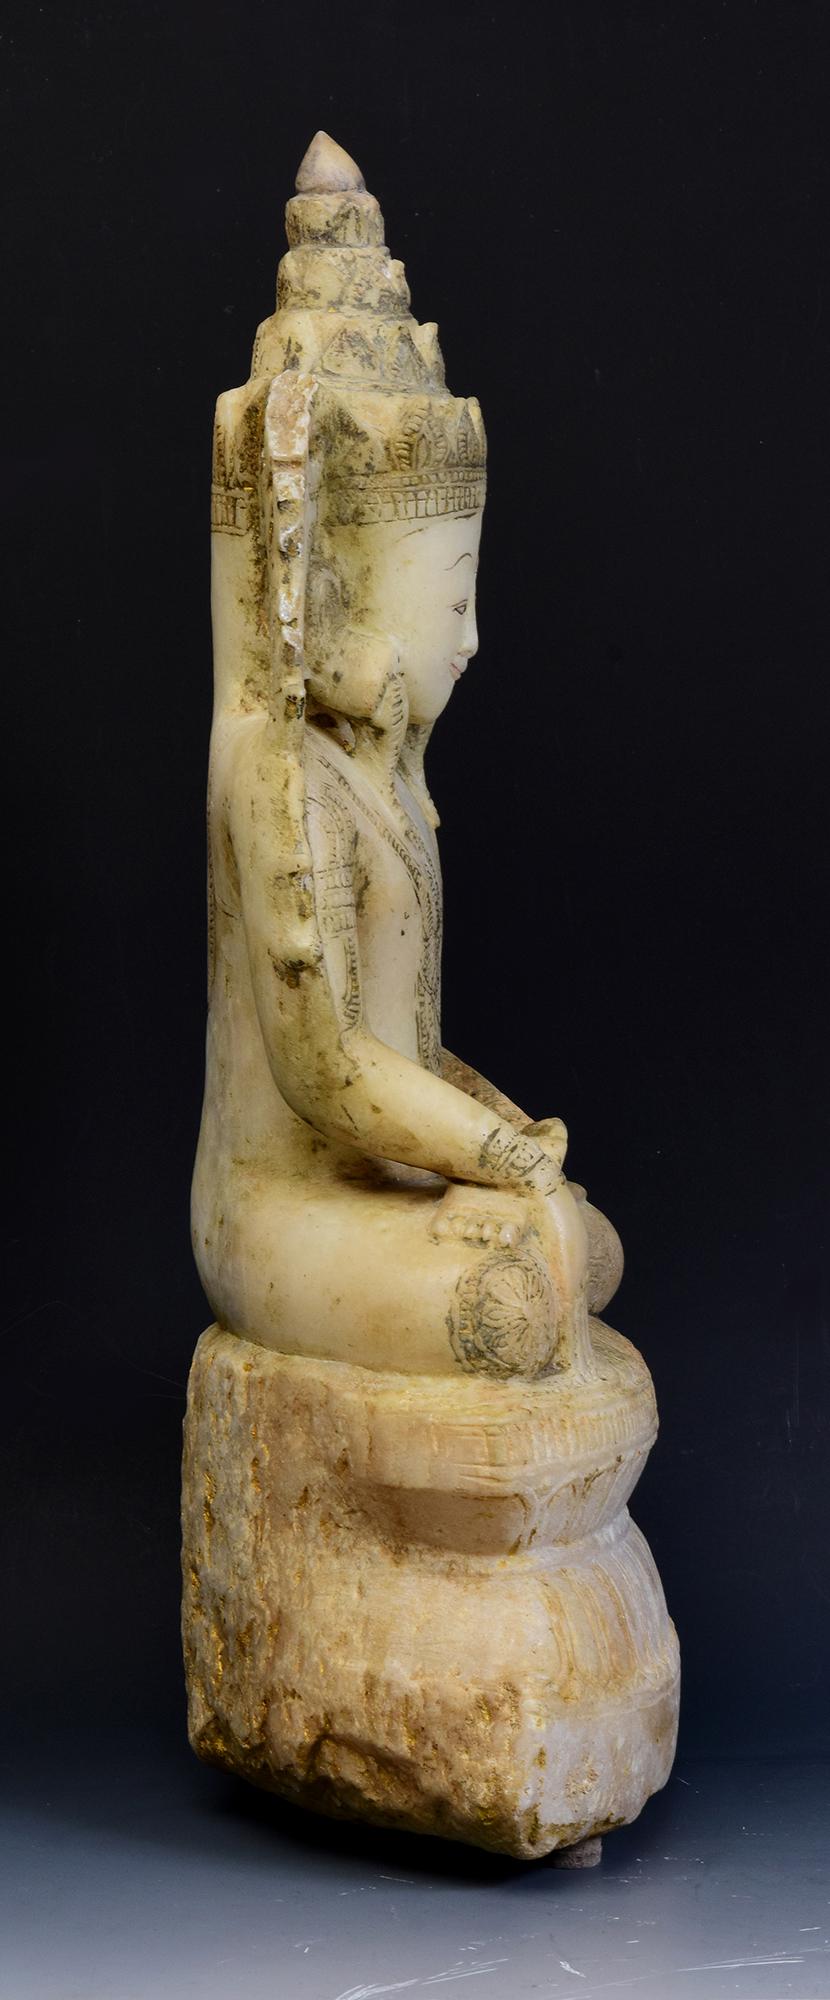 18th C., Shan, Rare Antique Burmese Alabaster Marble Seated King Buddha Statue For Sale 9